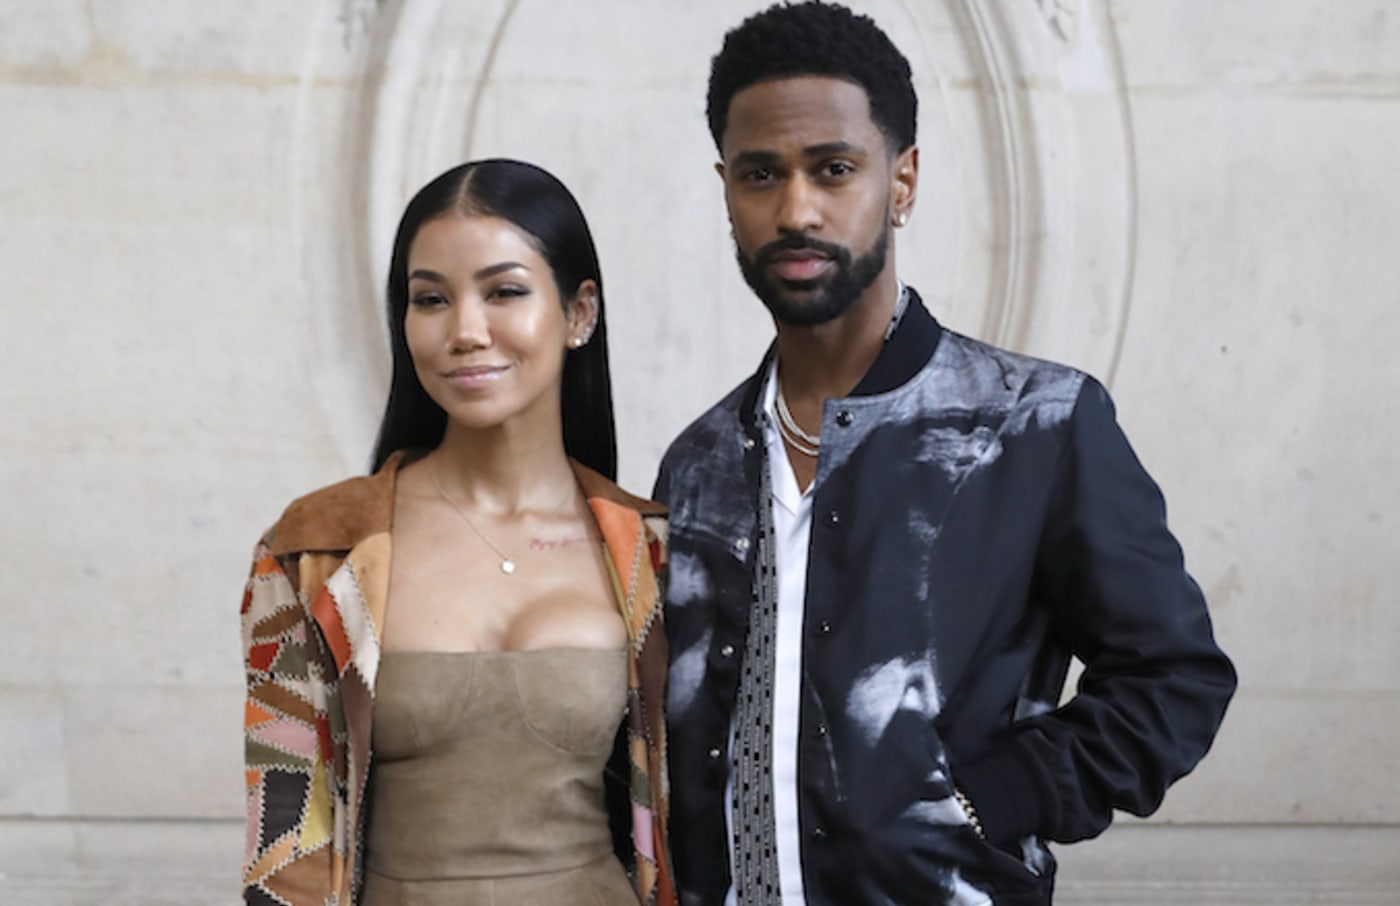 Jhene Aiko and Big Sean poses for a photocall prior to the Christian Dior's fashion show